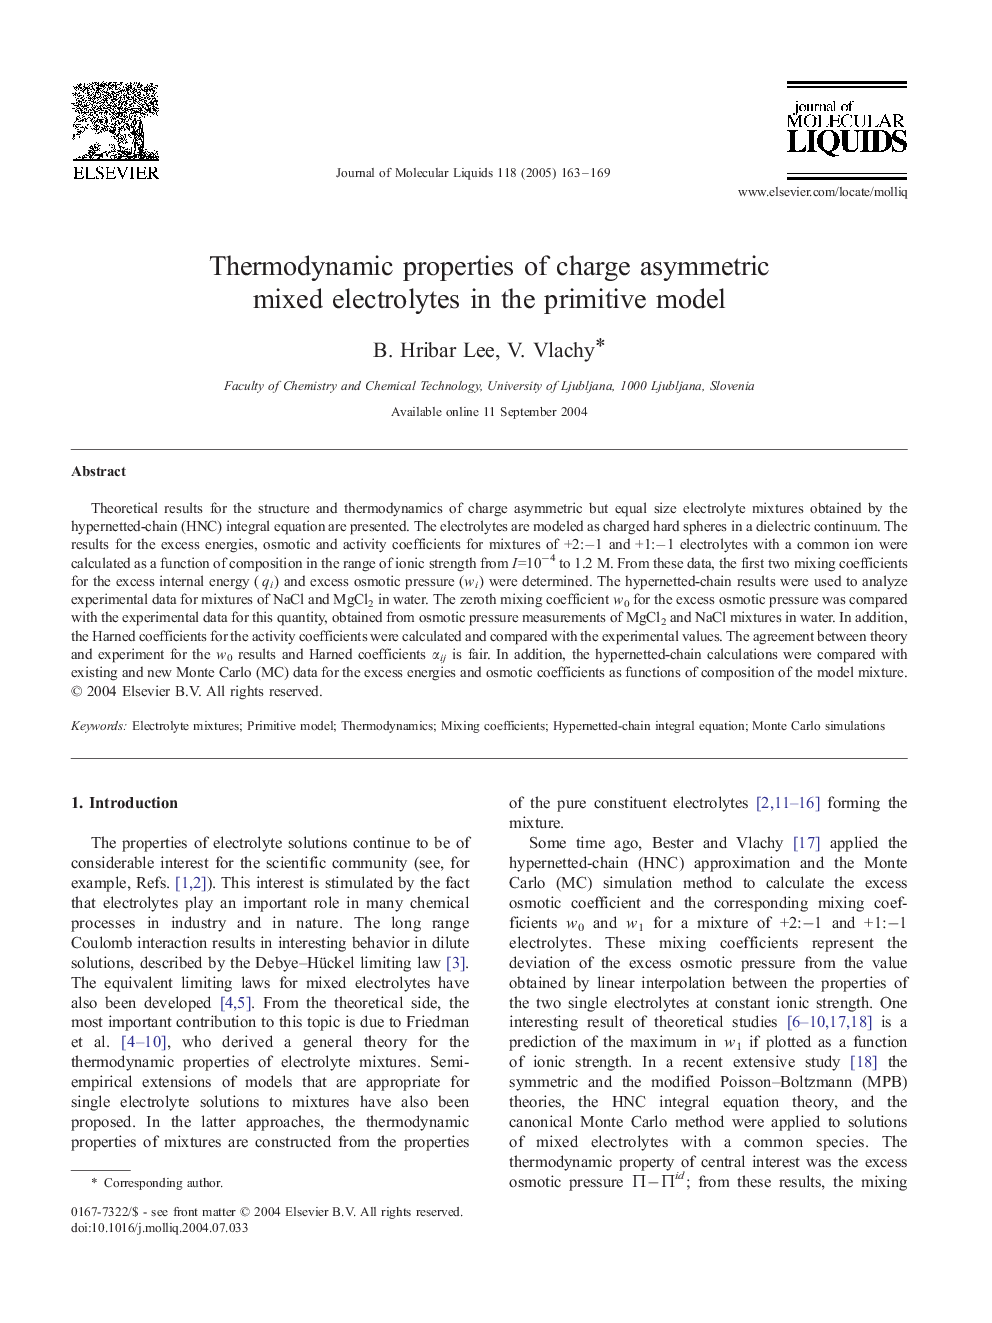 Thermodynamic properties of charge asymmetric mixed electrolytes in the primitive model